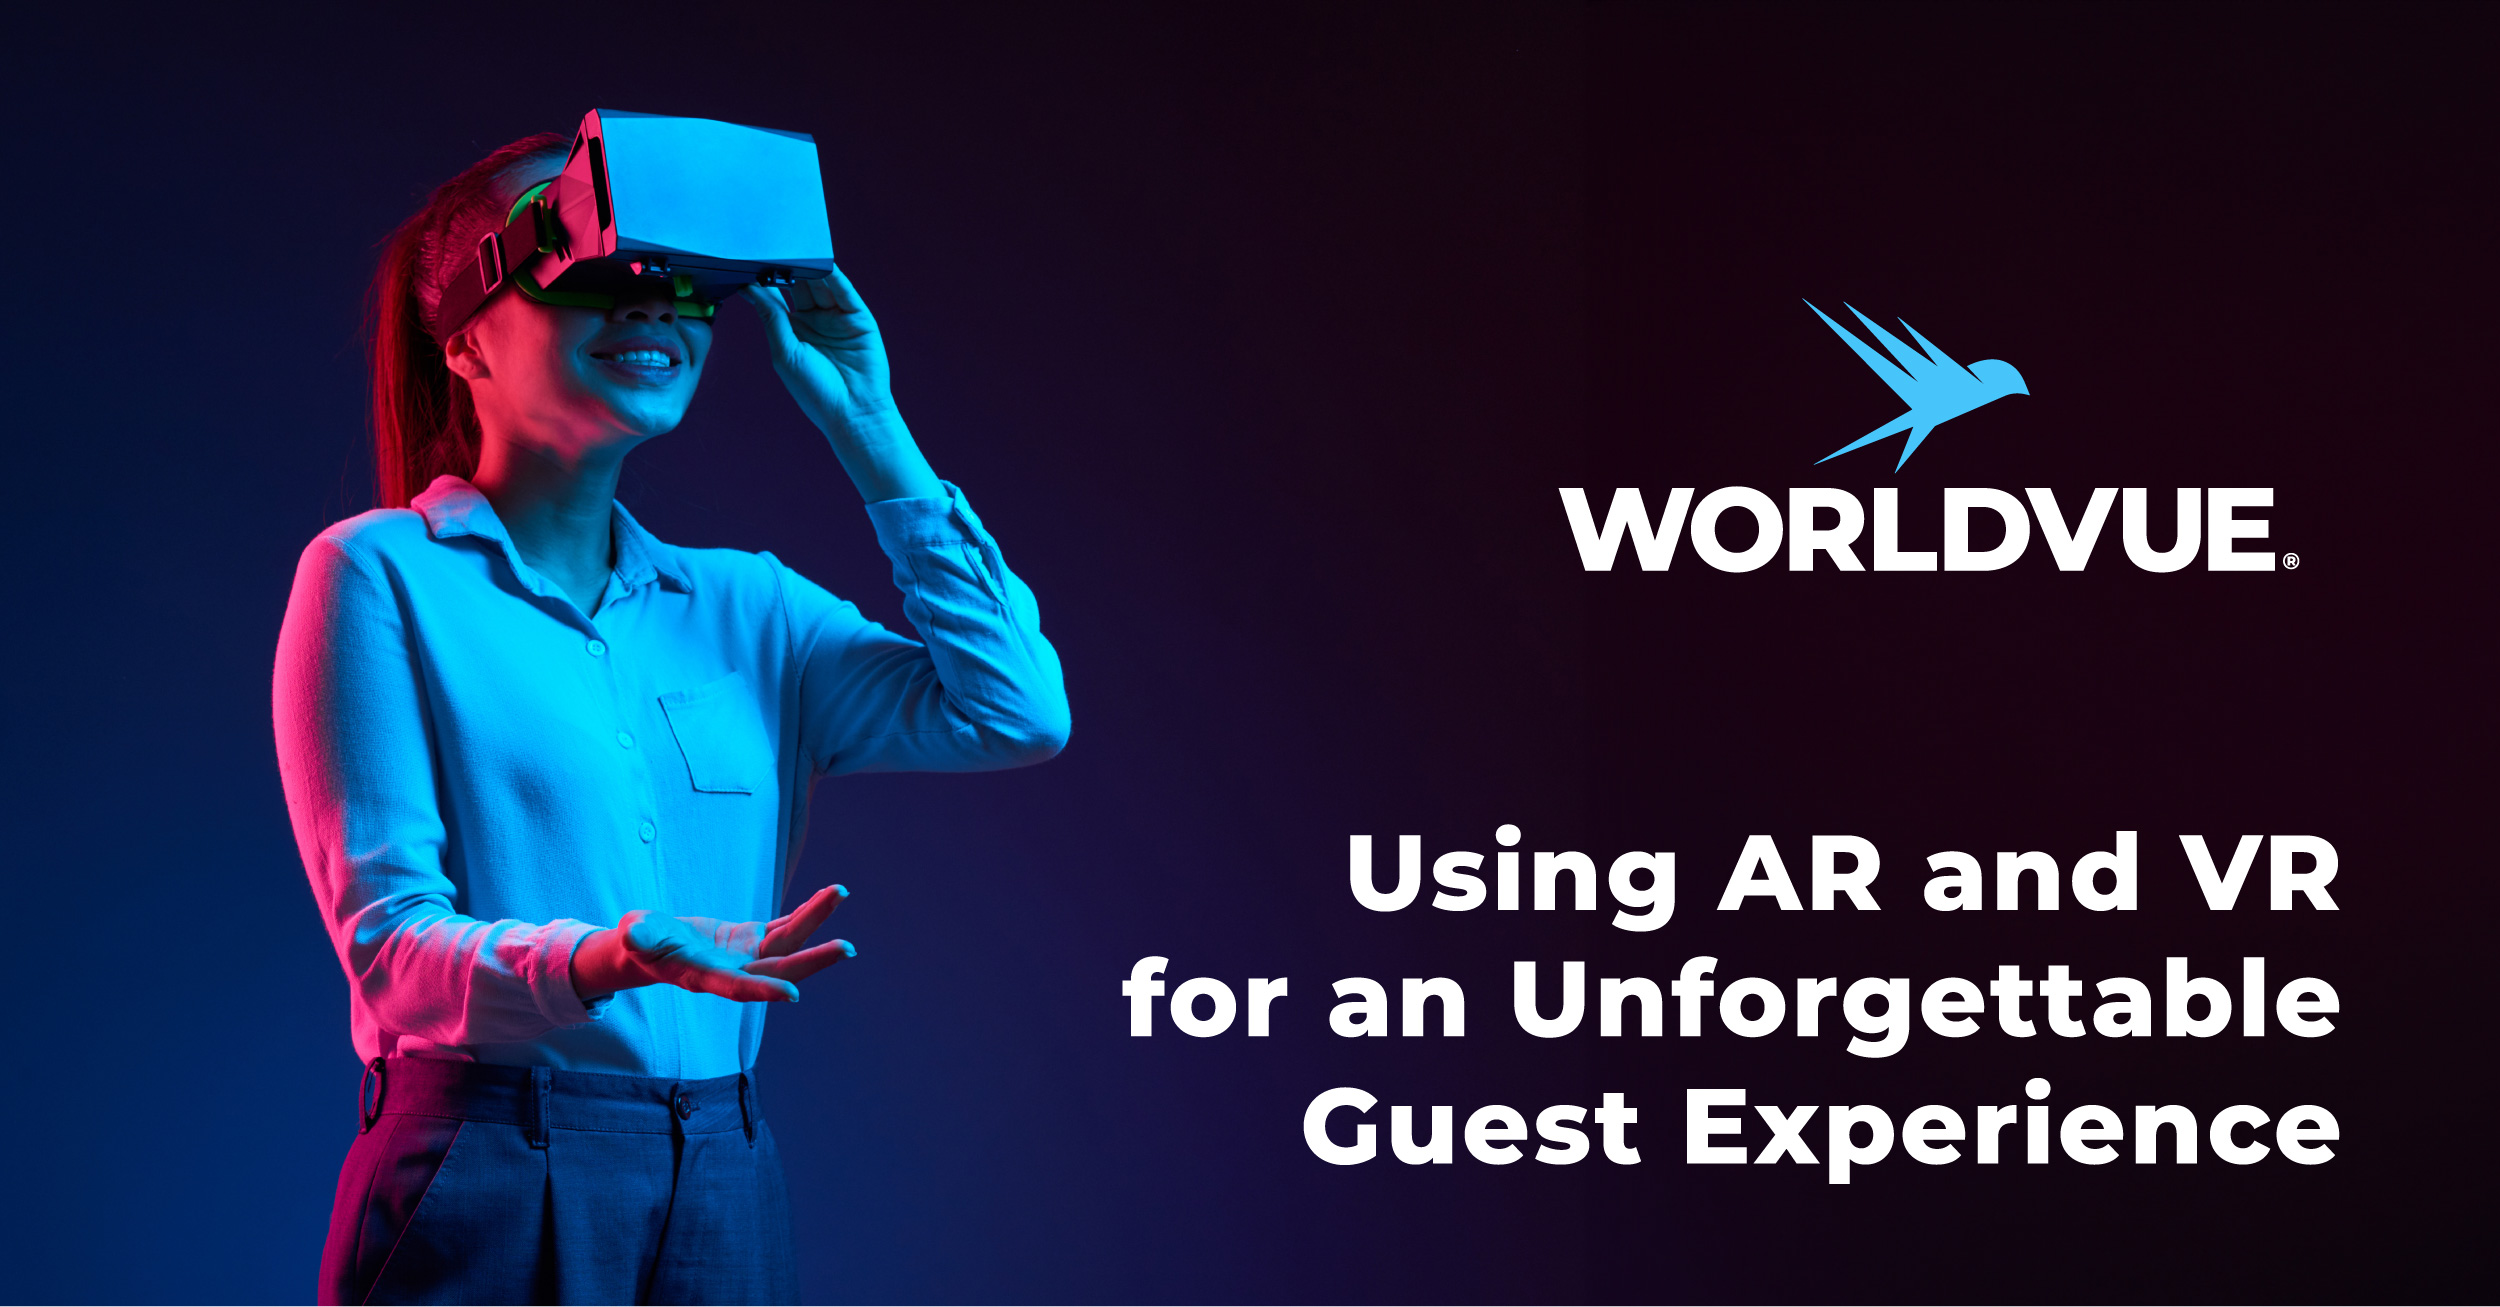 WorldVue logo and image of someone using VR headset, with text "Using AR and VR for an Unforgettable Guest Experience"